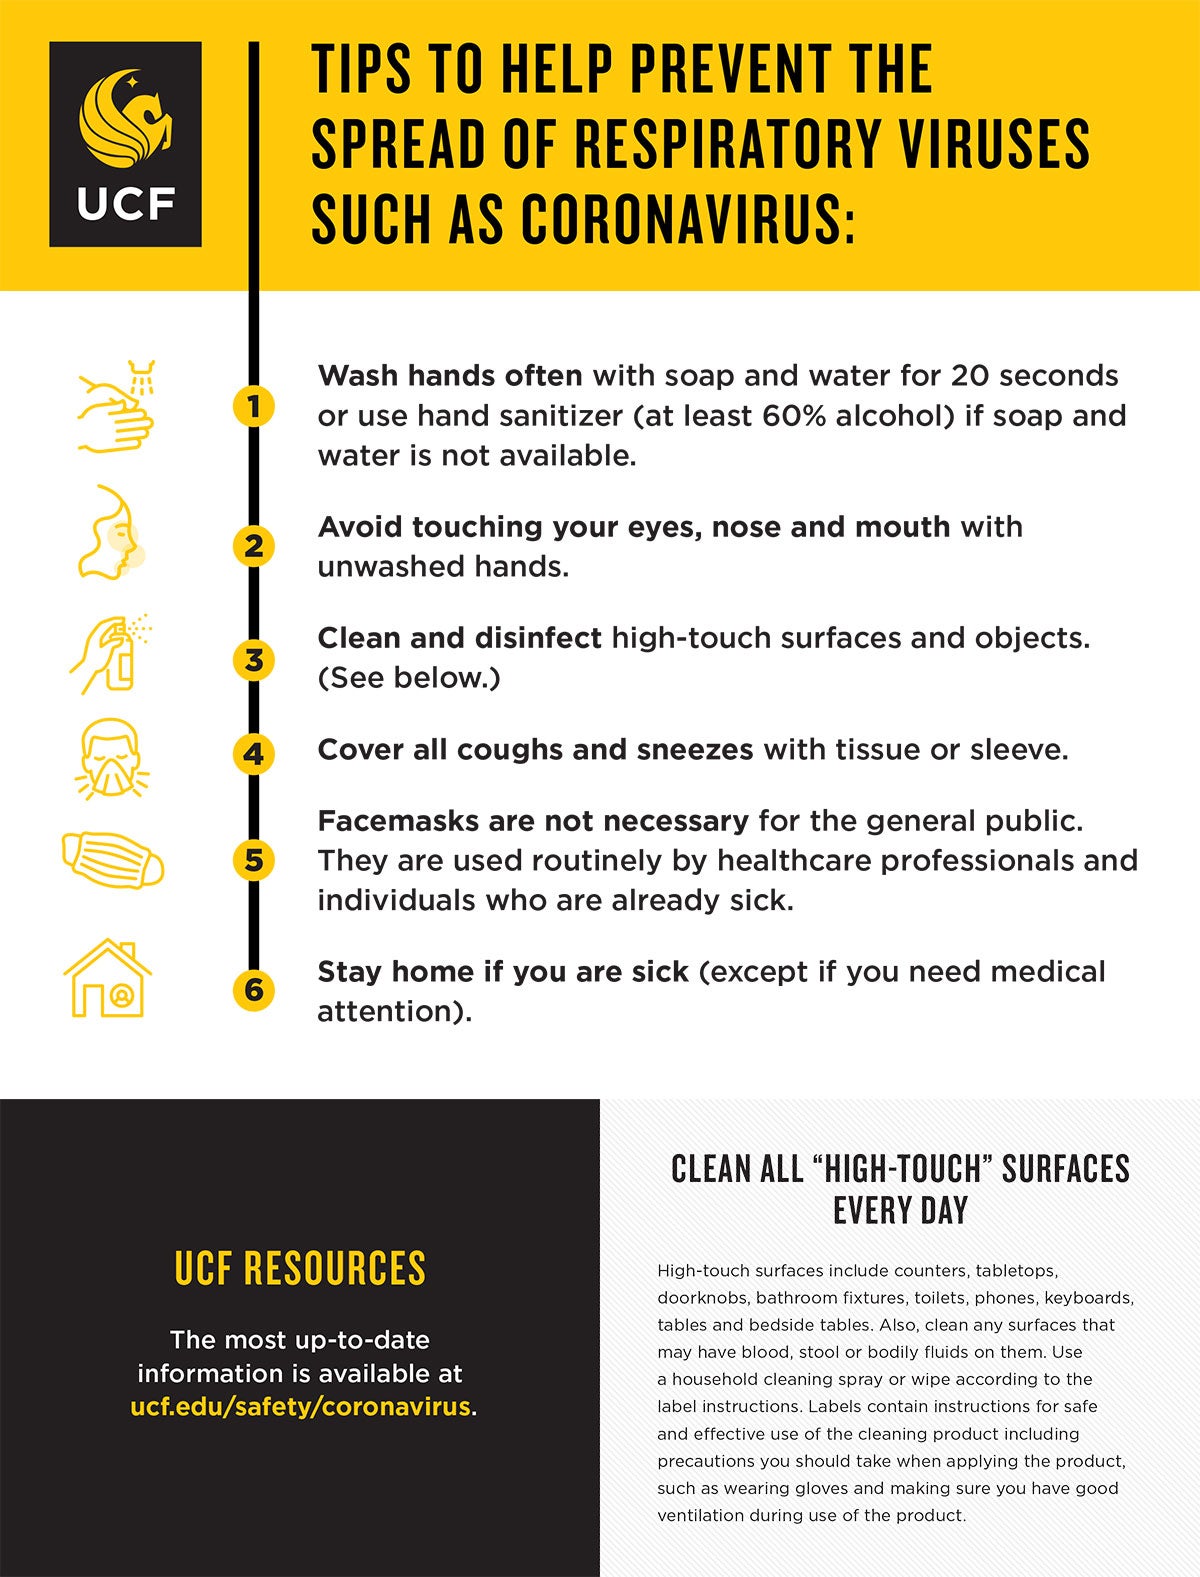 Tips to help prevent the spread of viruses such as coronavirus